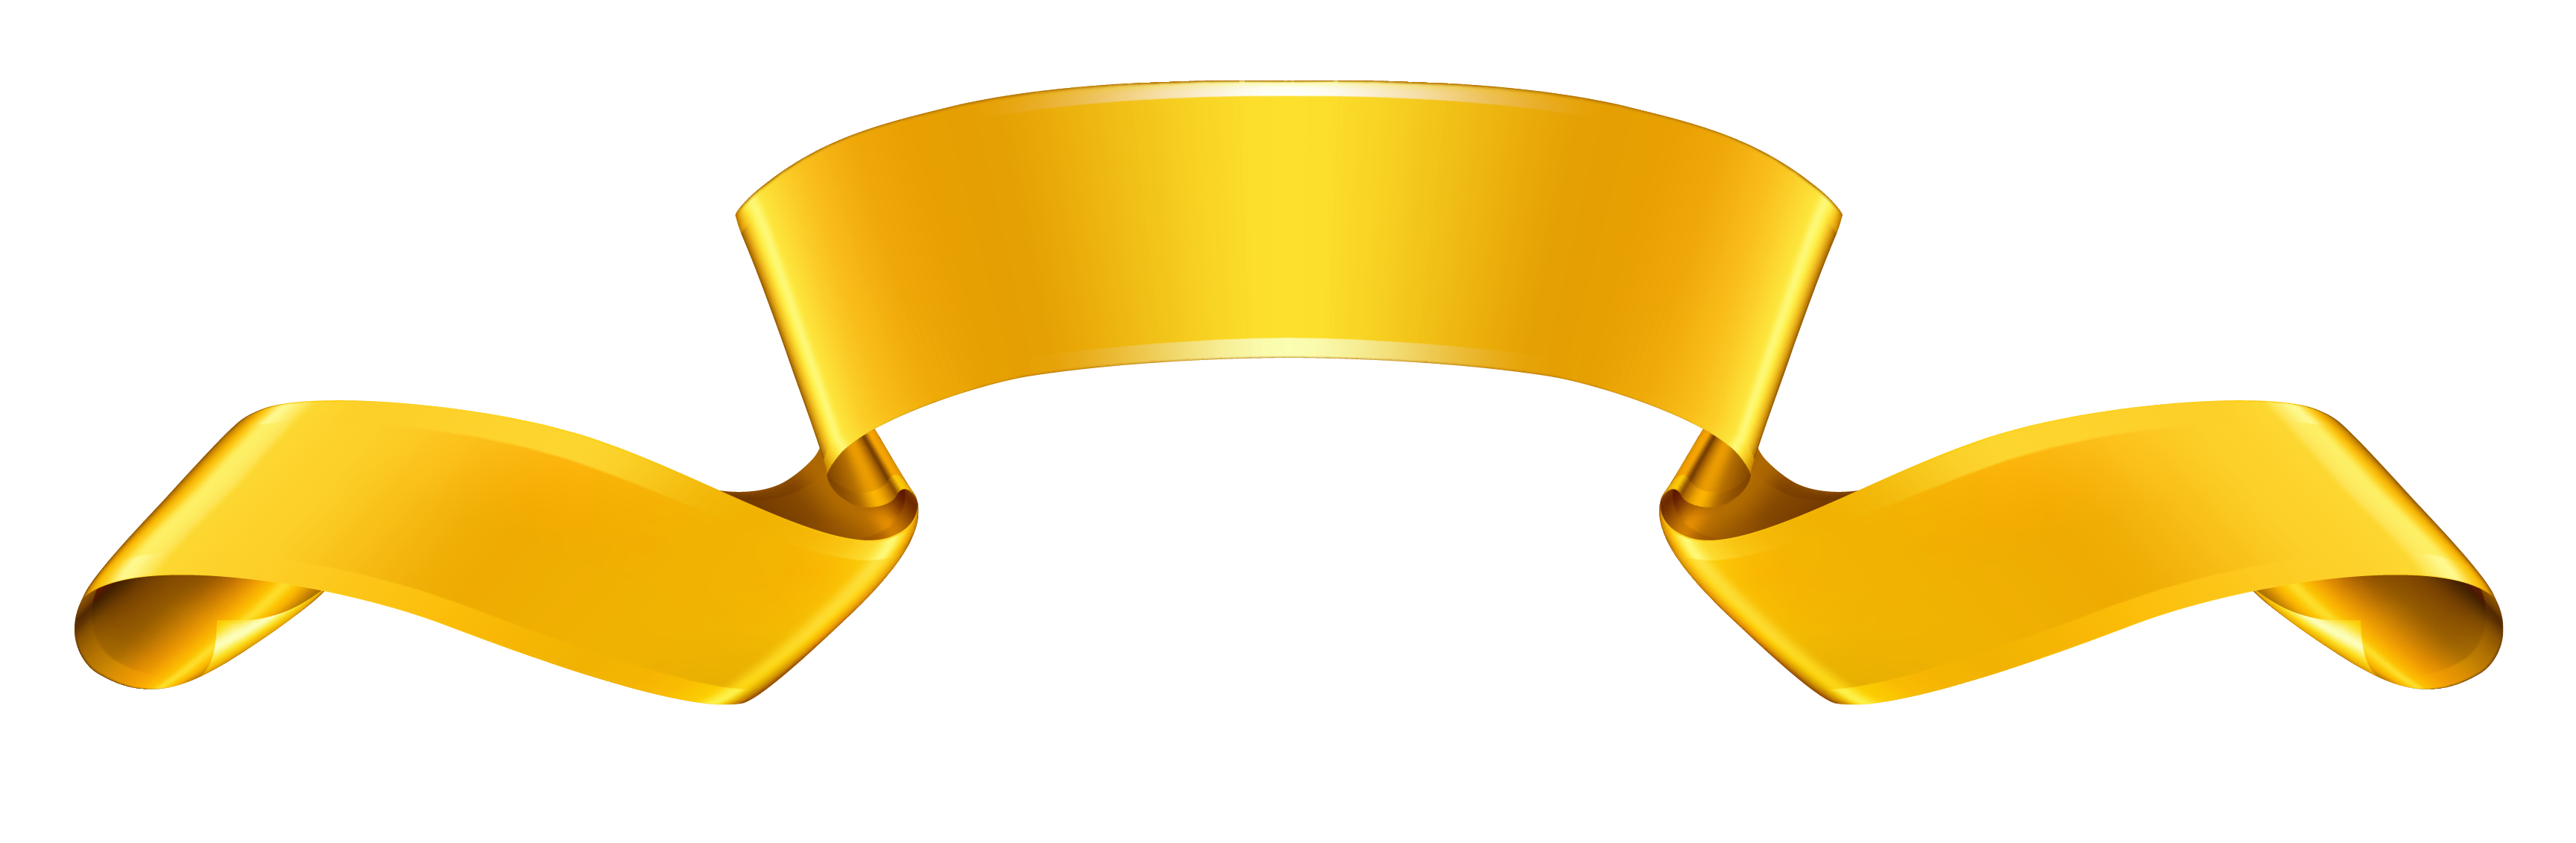 Gold Bow PNG Image​  Gallery Yopriceville - High-Quality Free Images and  Transparent PNG Clipart